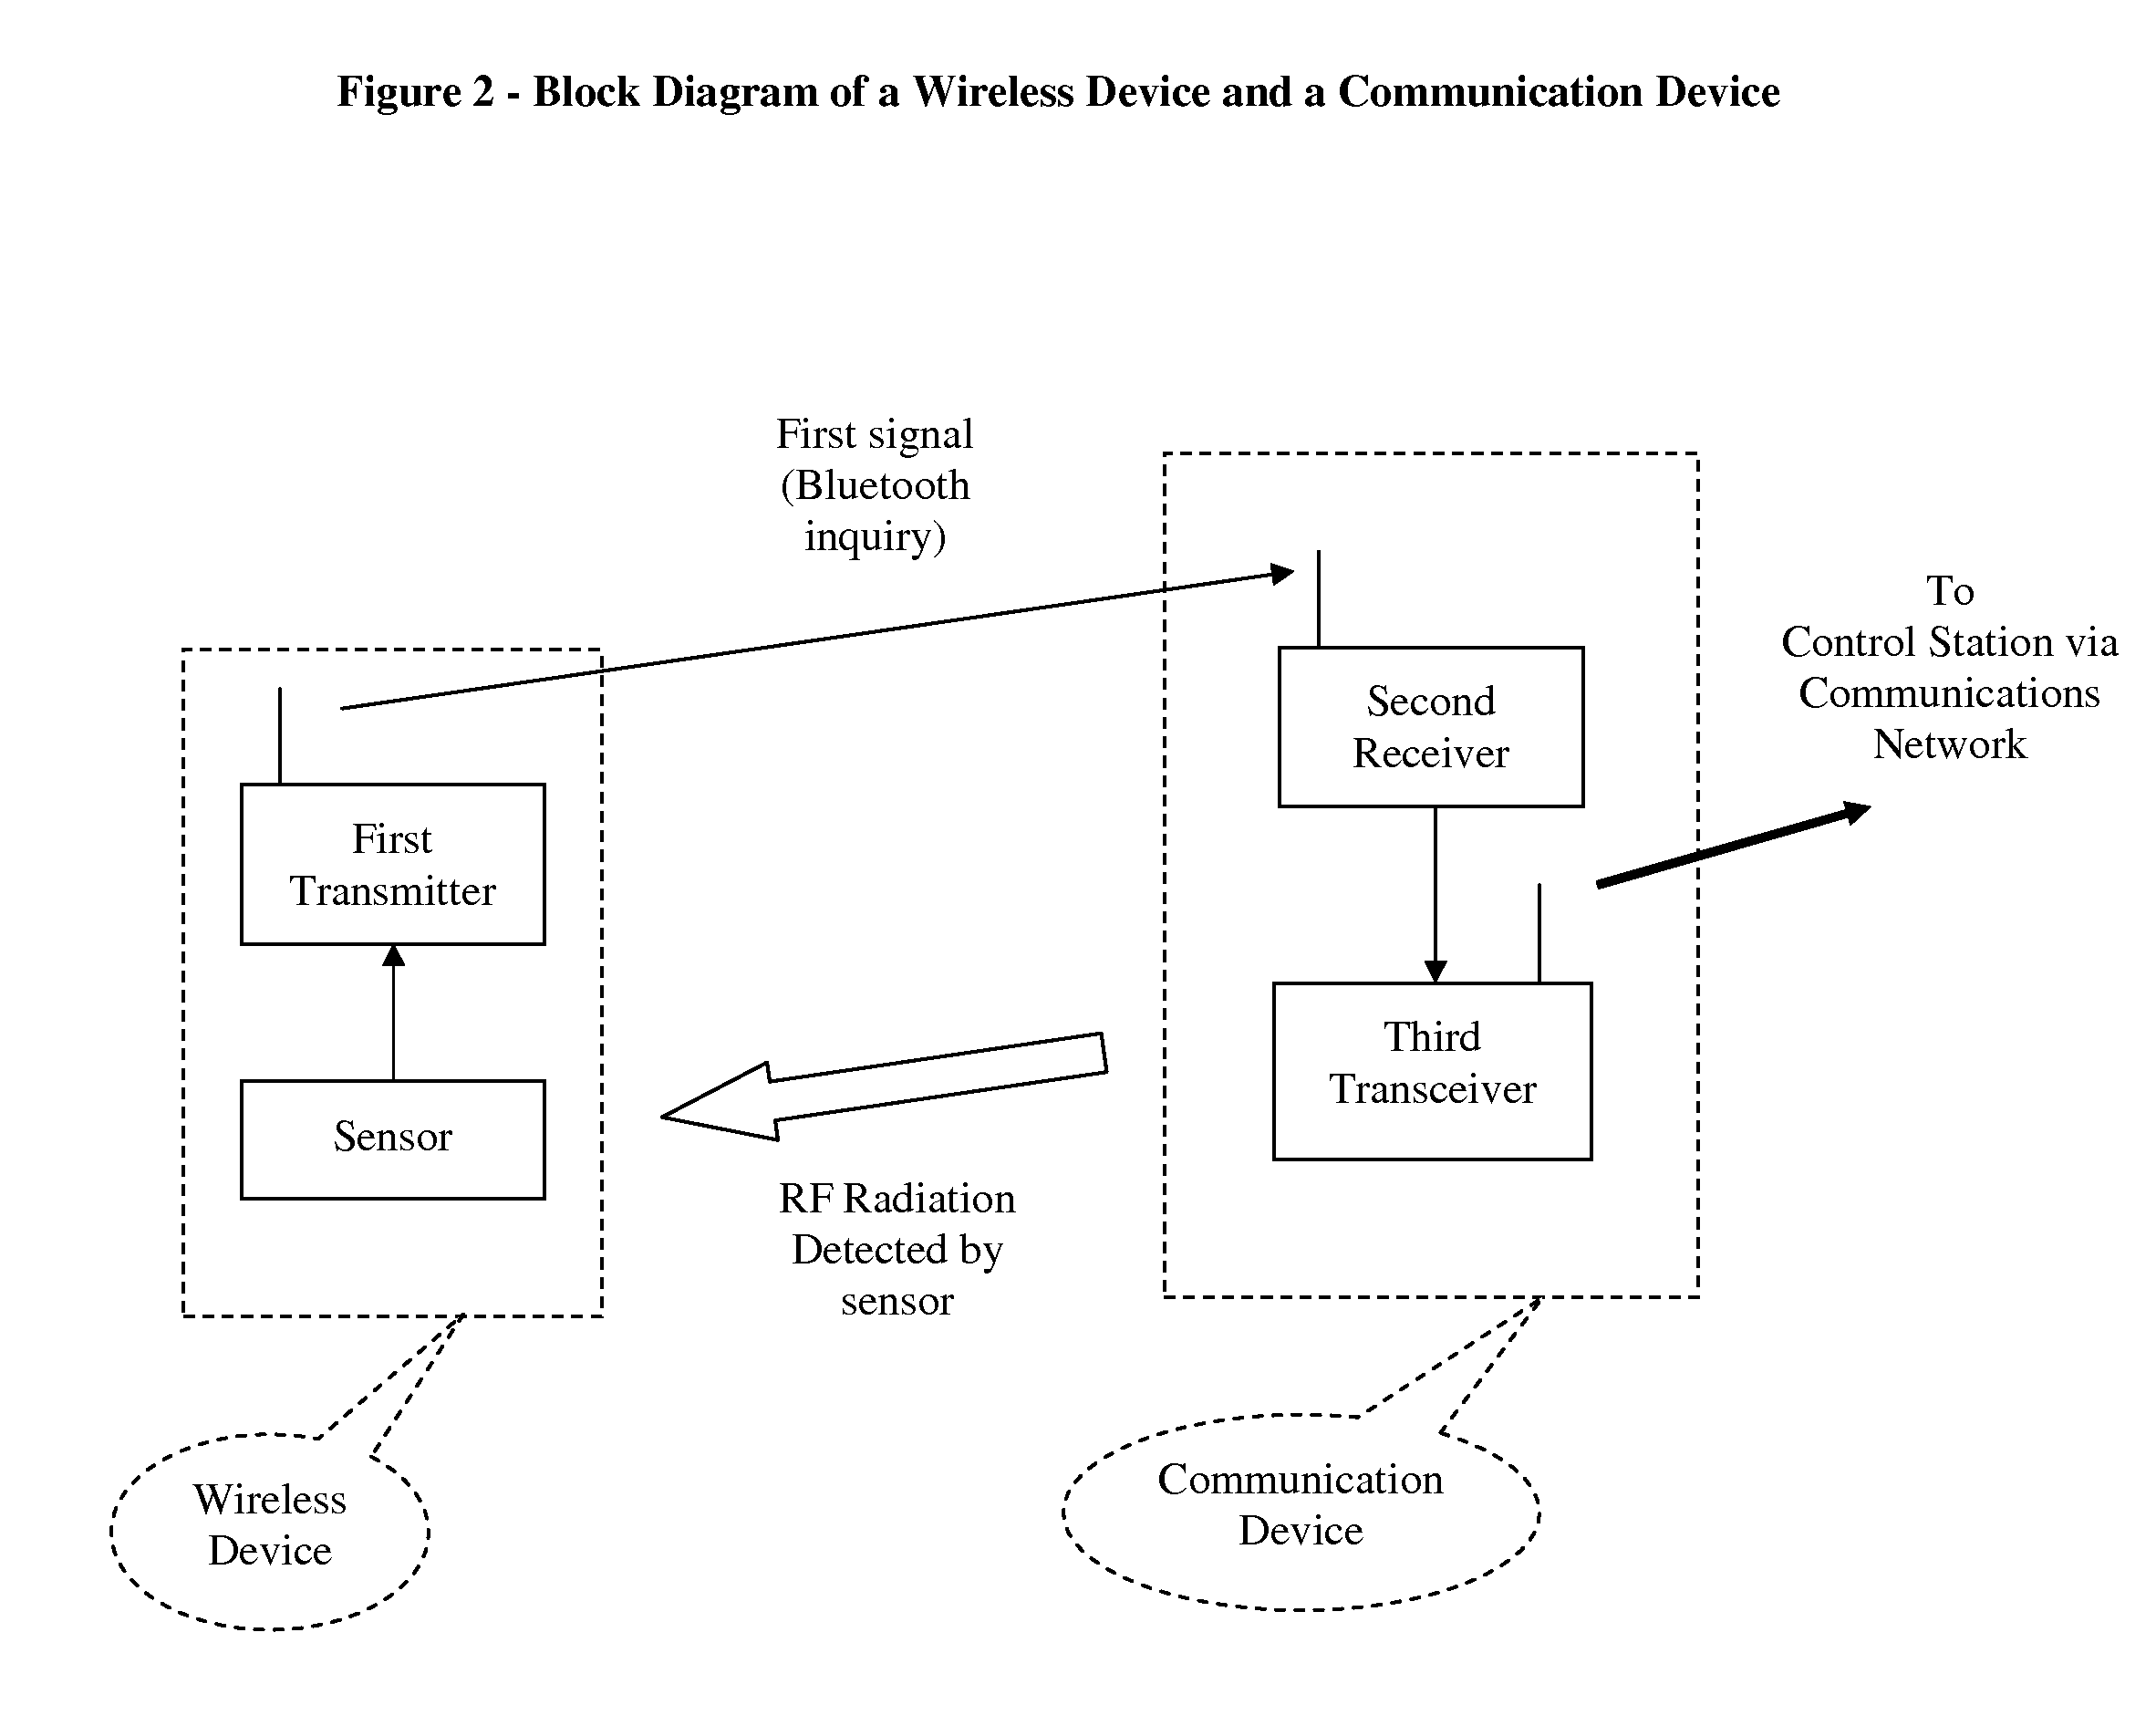 Location determination of low power wireless devices over a wide area